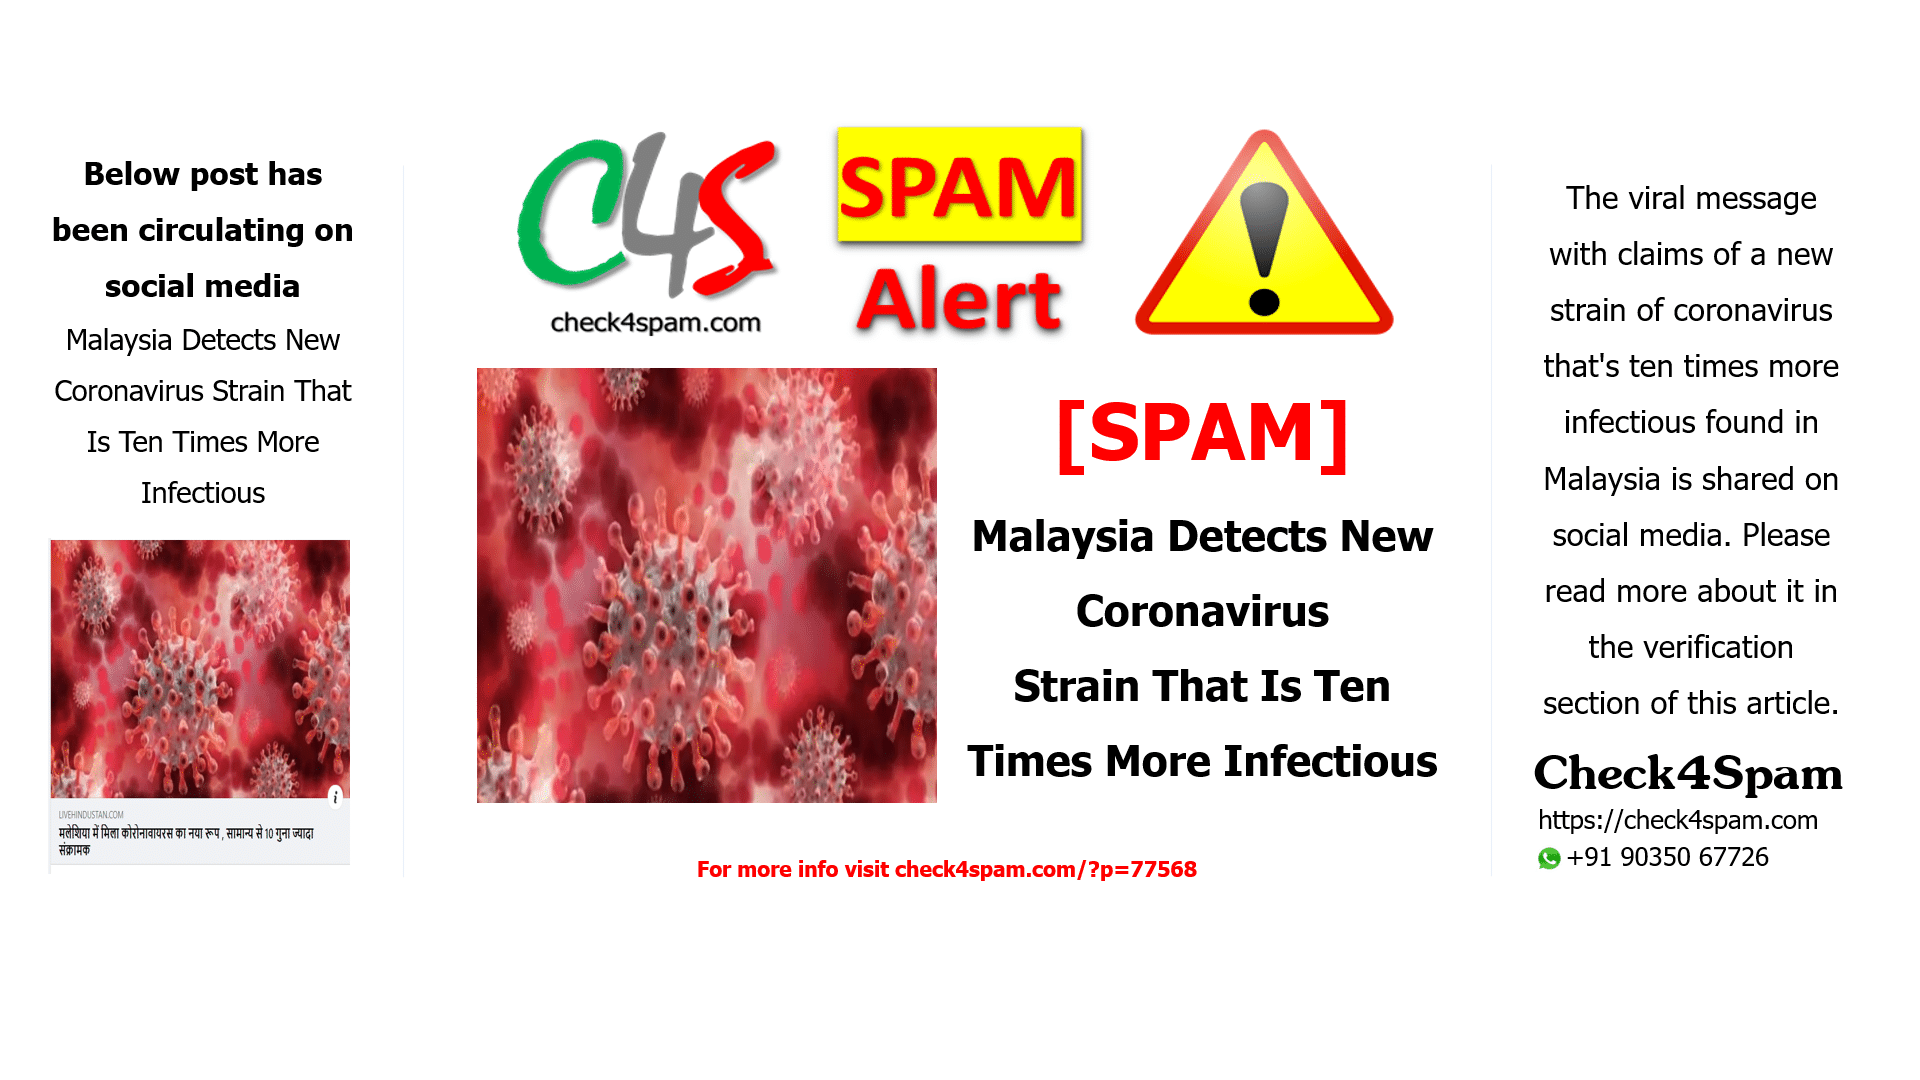 Malaysia Detects New Coronavirus Strain That Is Ten Times More Infectious